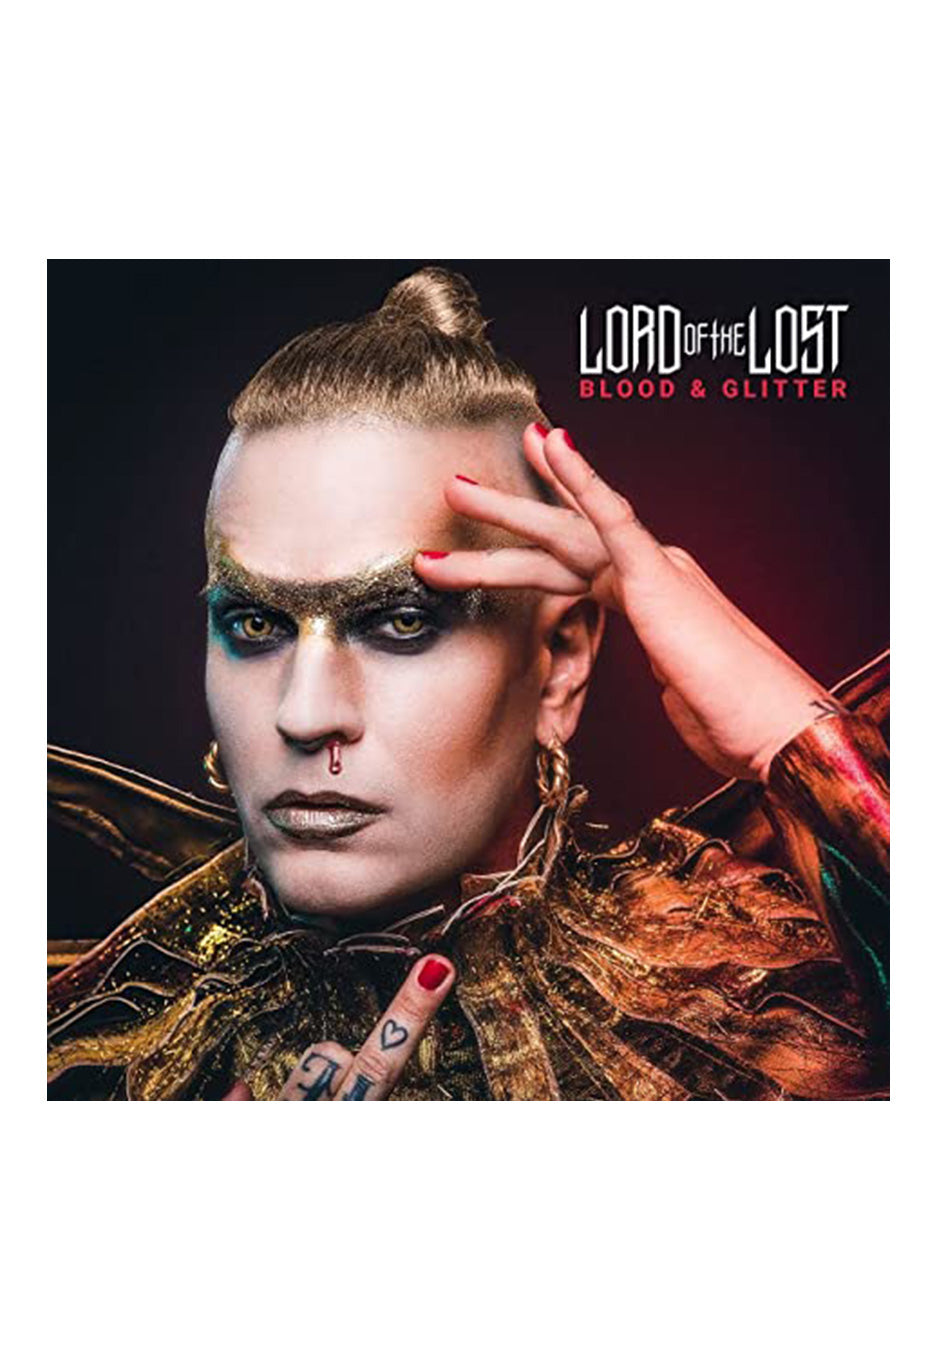 Lord Of The Lost - Blood & Glitter Ltd. Recycled - Colored 2 Vinyl